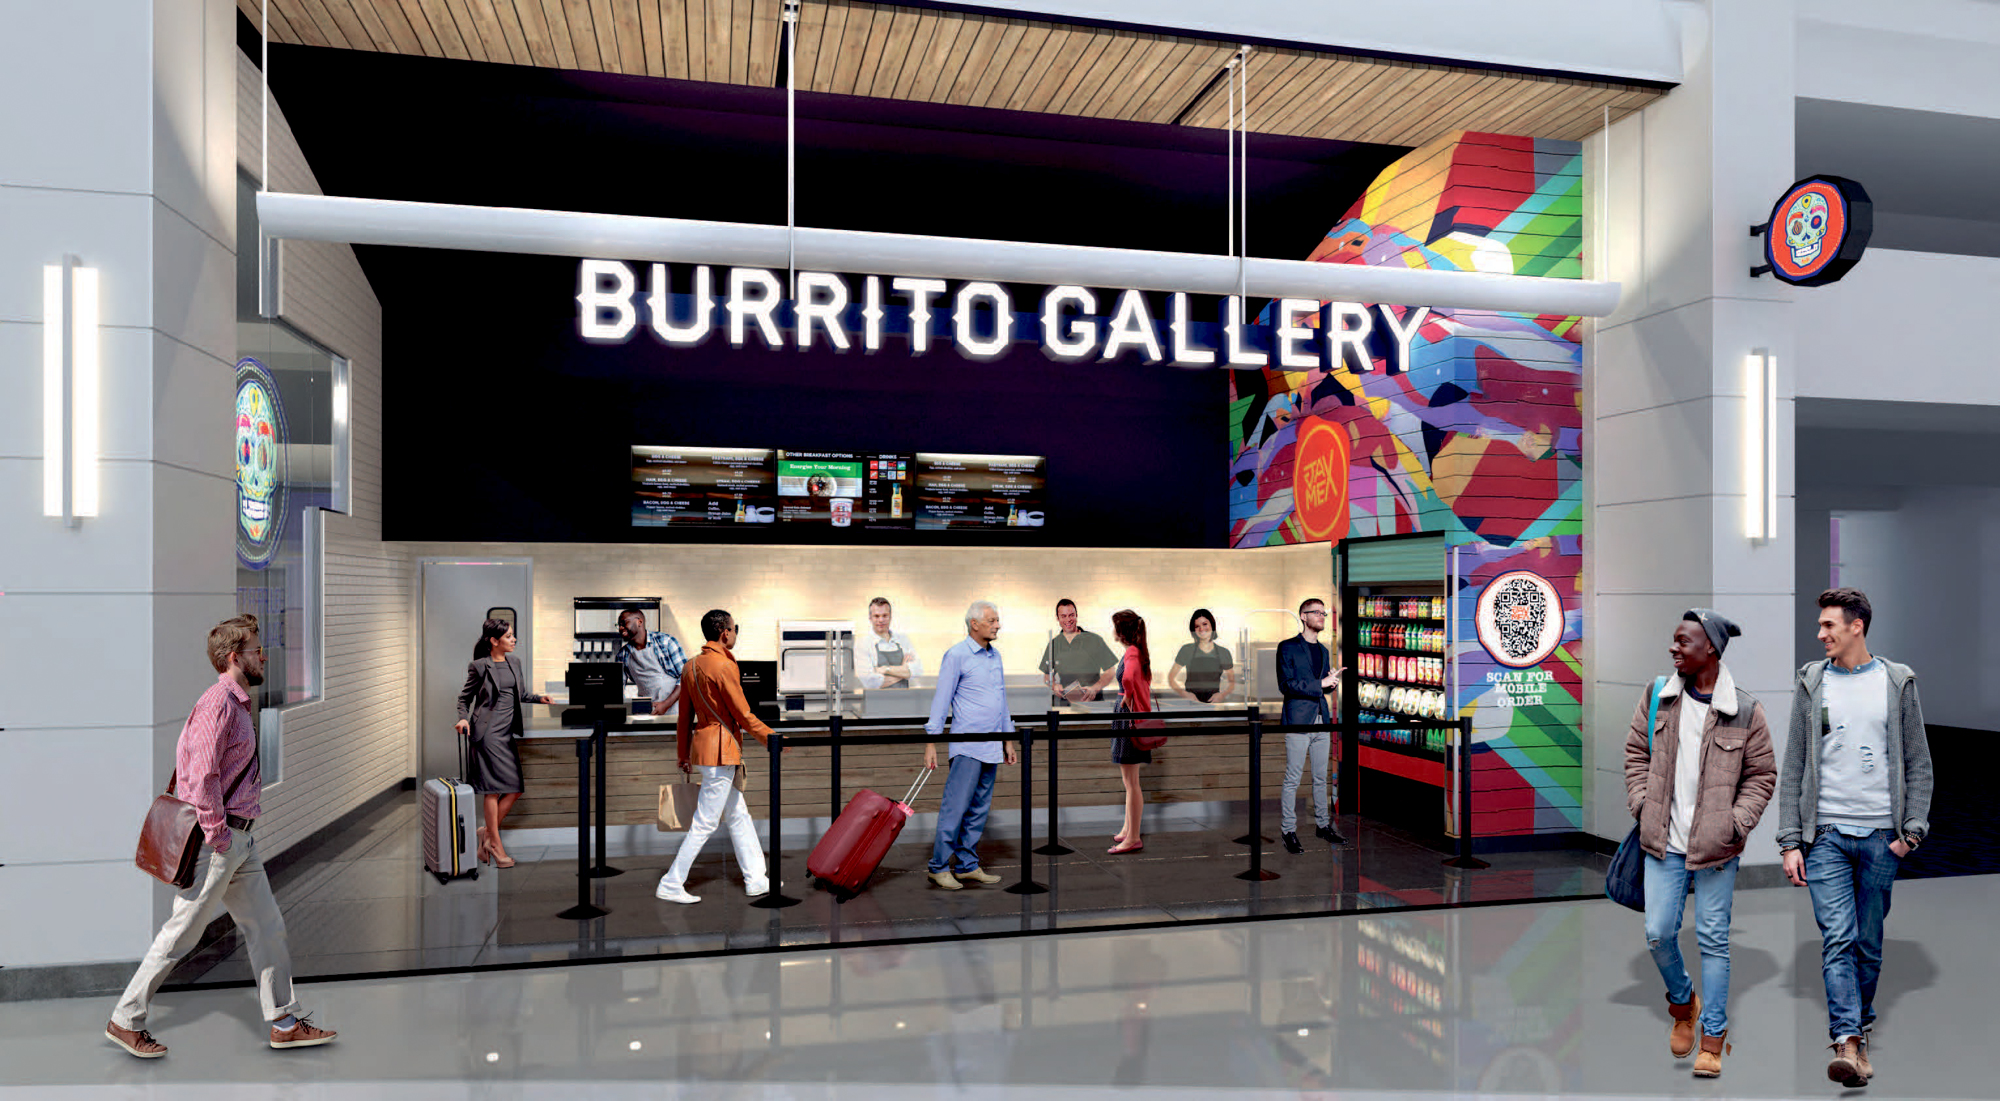 Burrito Gallery will open in Concourse A to replace the “Ciao” grab-and-go market.